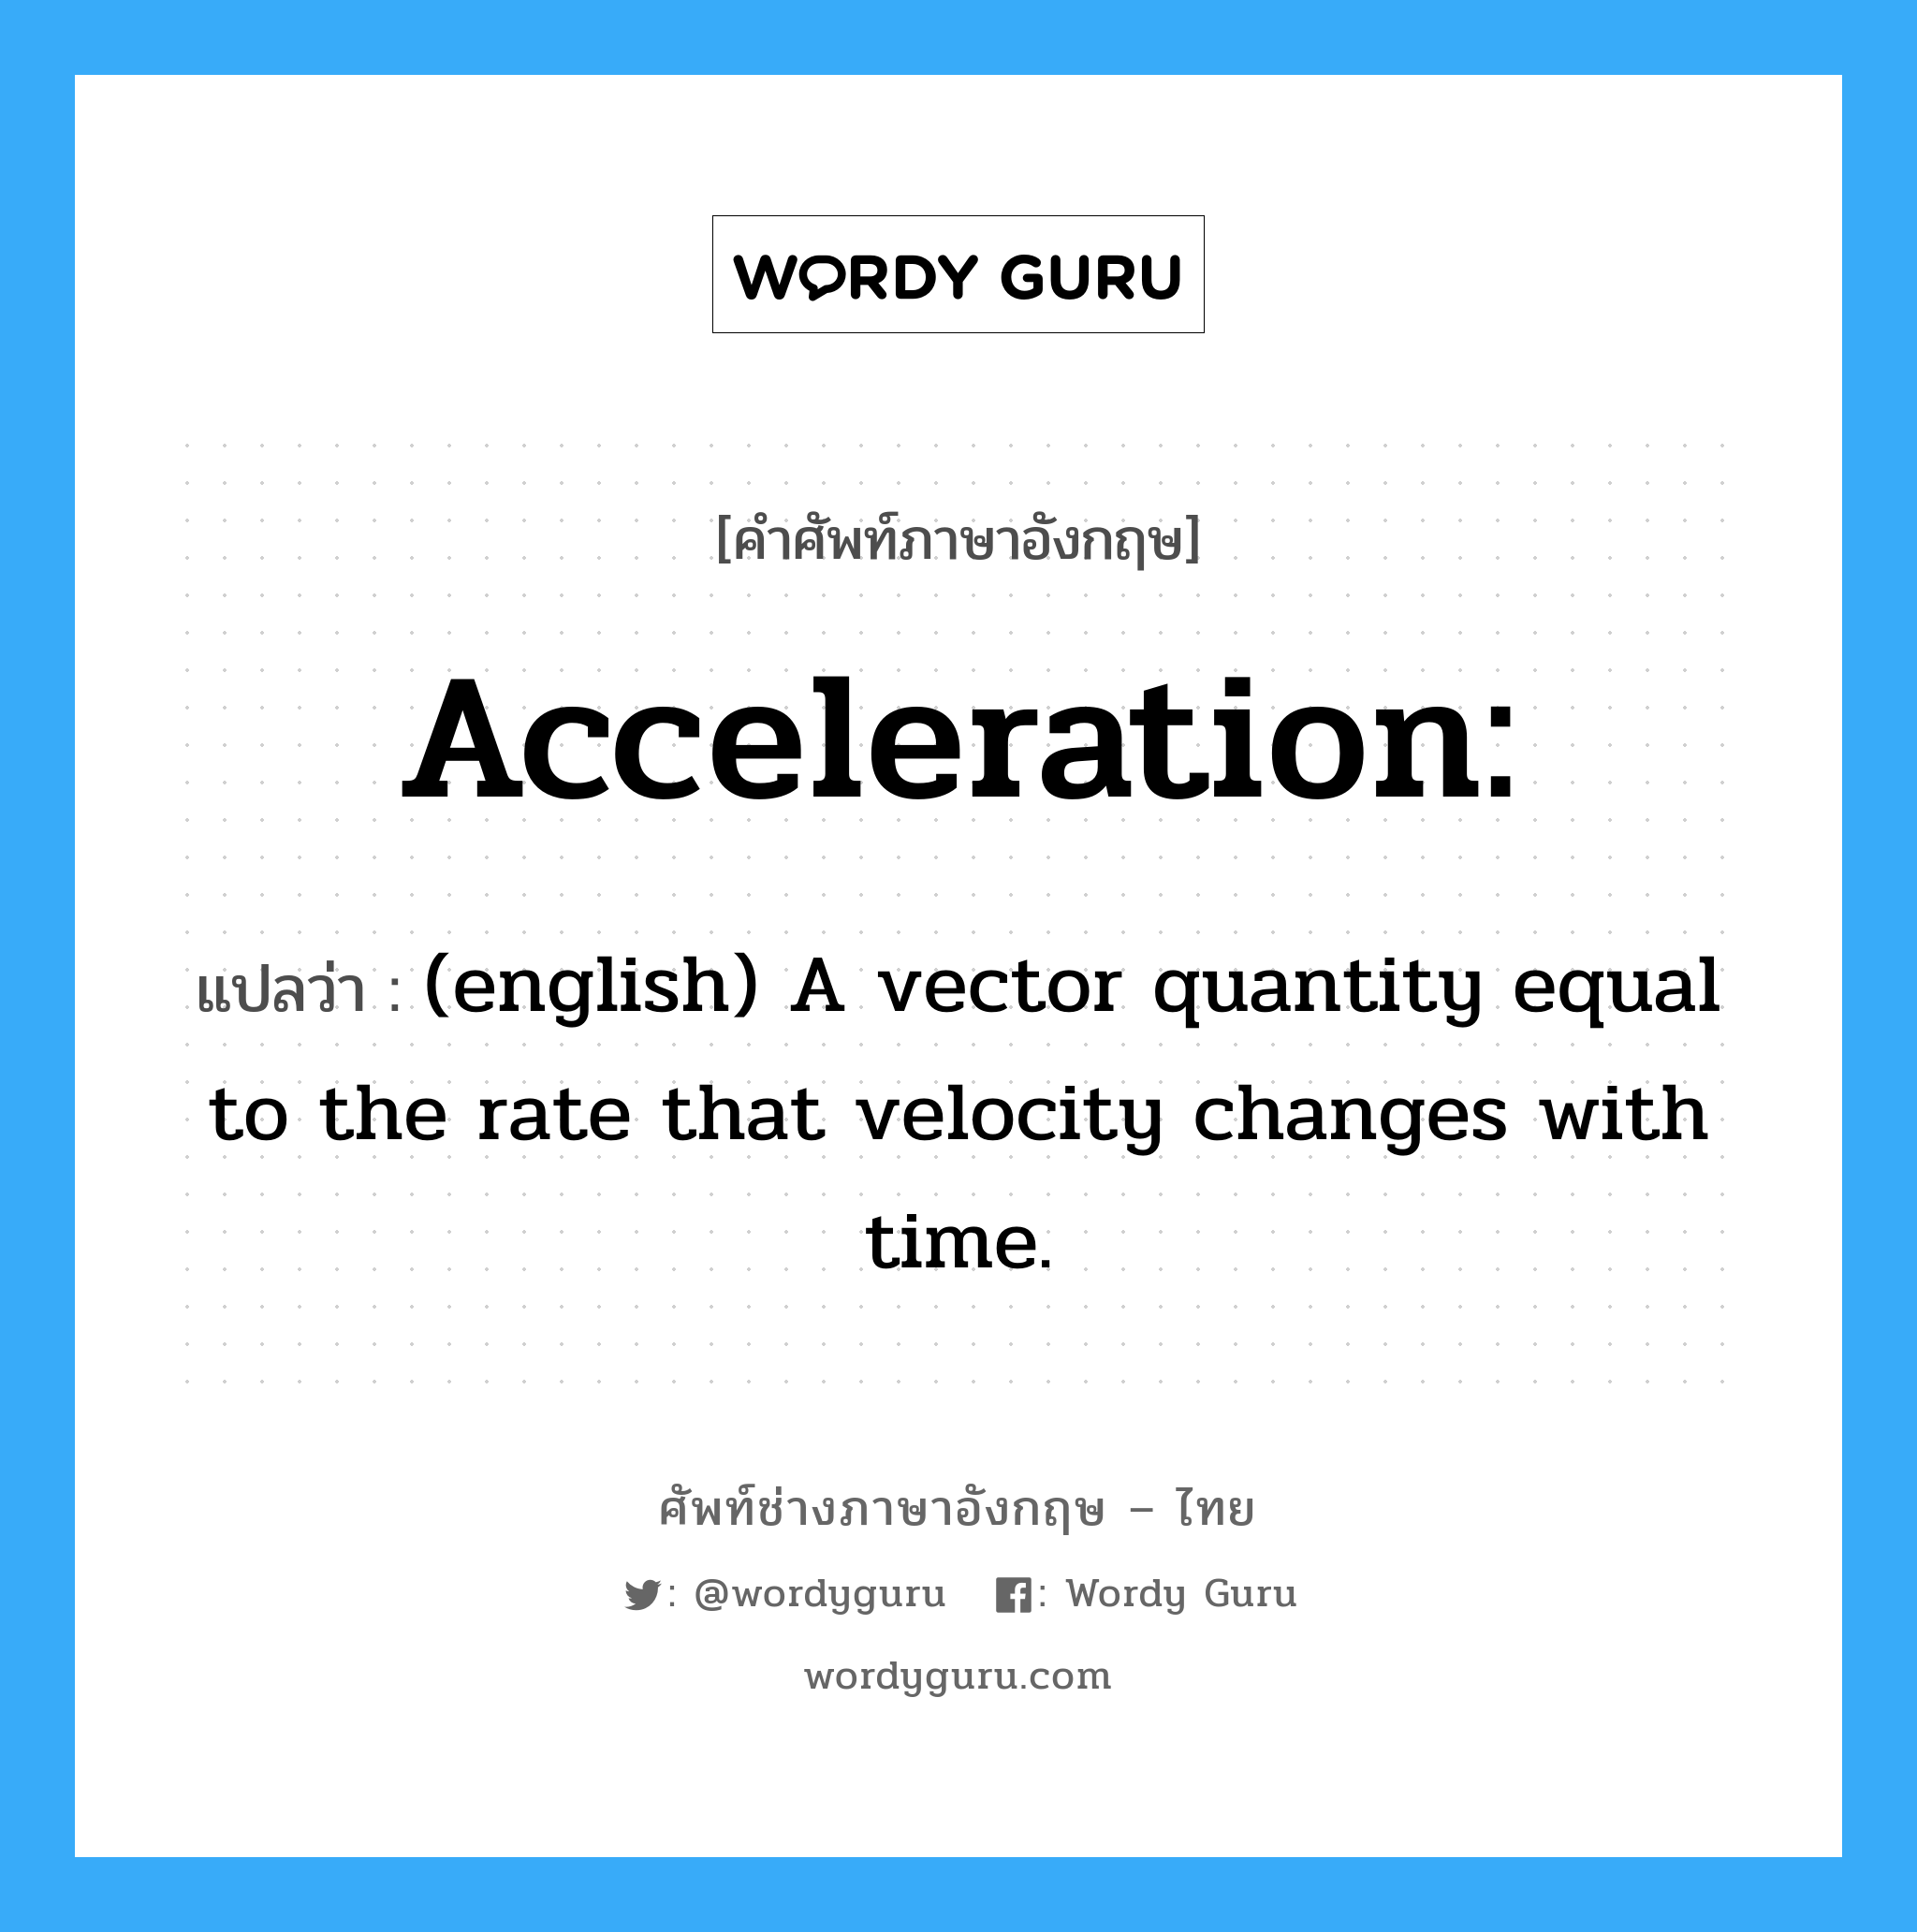 Acceleration: แปลว่า?, คำศัพท์ช่างภาษาอังกฤษ - ไทย Acceleration: คำศัพท์ภาษาอังกฤษ Acceleration: แปลว่า (english) A vector quantity equal to the rate that velocity changes with time.